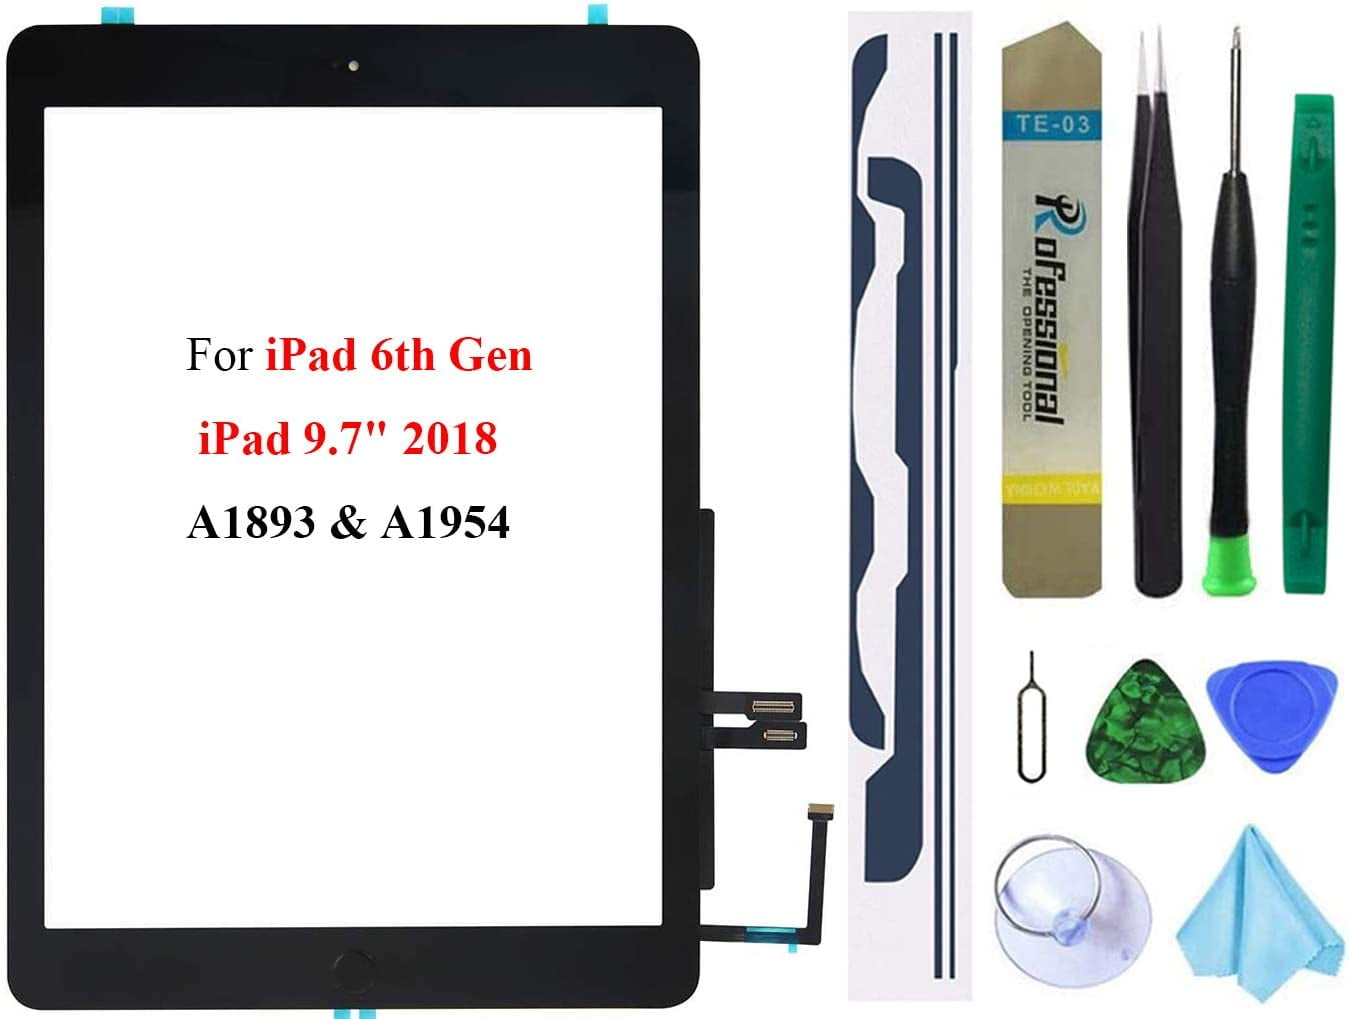 Brand New and High Quality. Replacement For Apple iPad 9.7 2018 6th Gen  A1893, A1954. Replacement for a Broken or Non-Functional Charge Por…